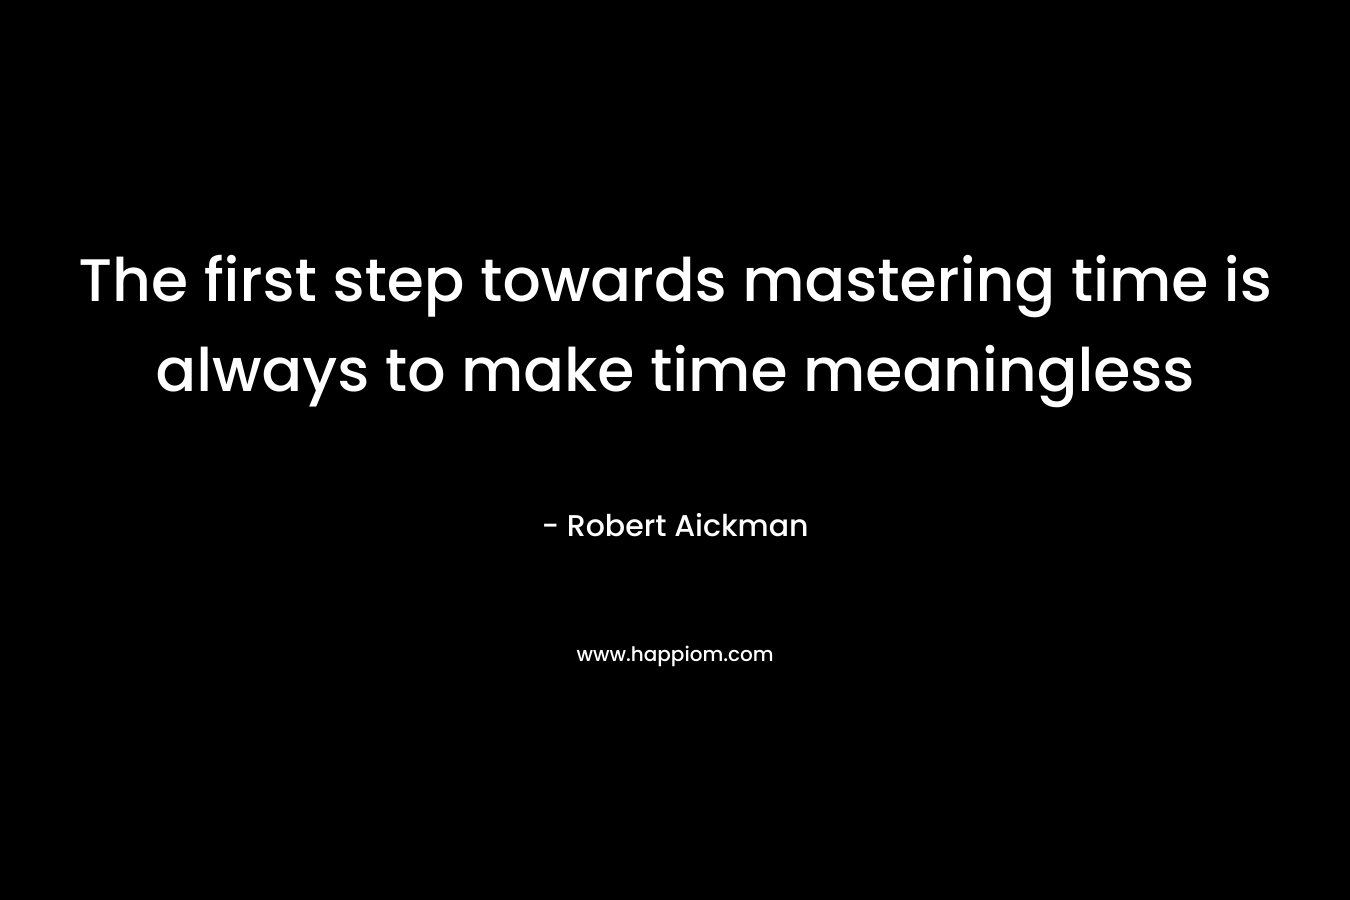 The first step towards mastering time is always to make time meaningless